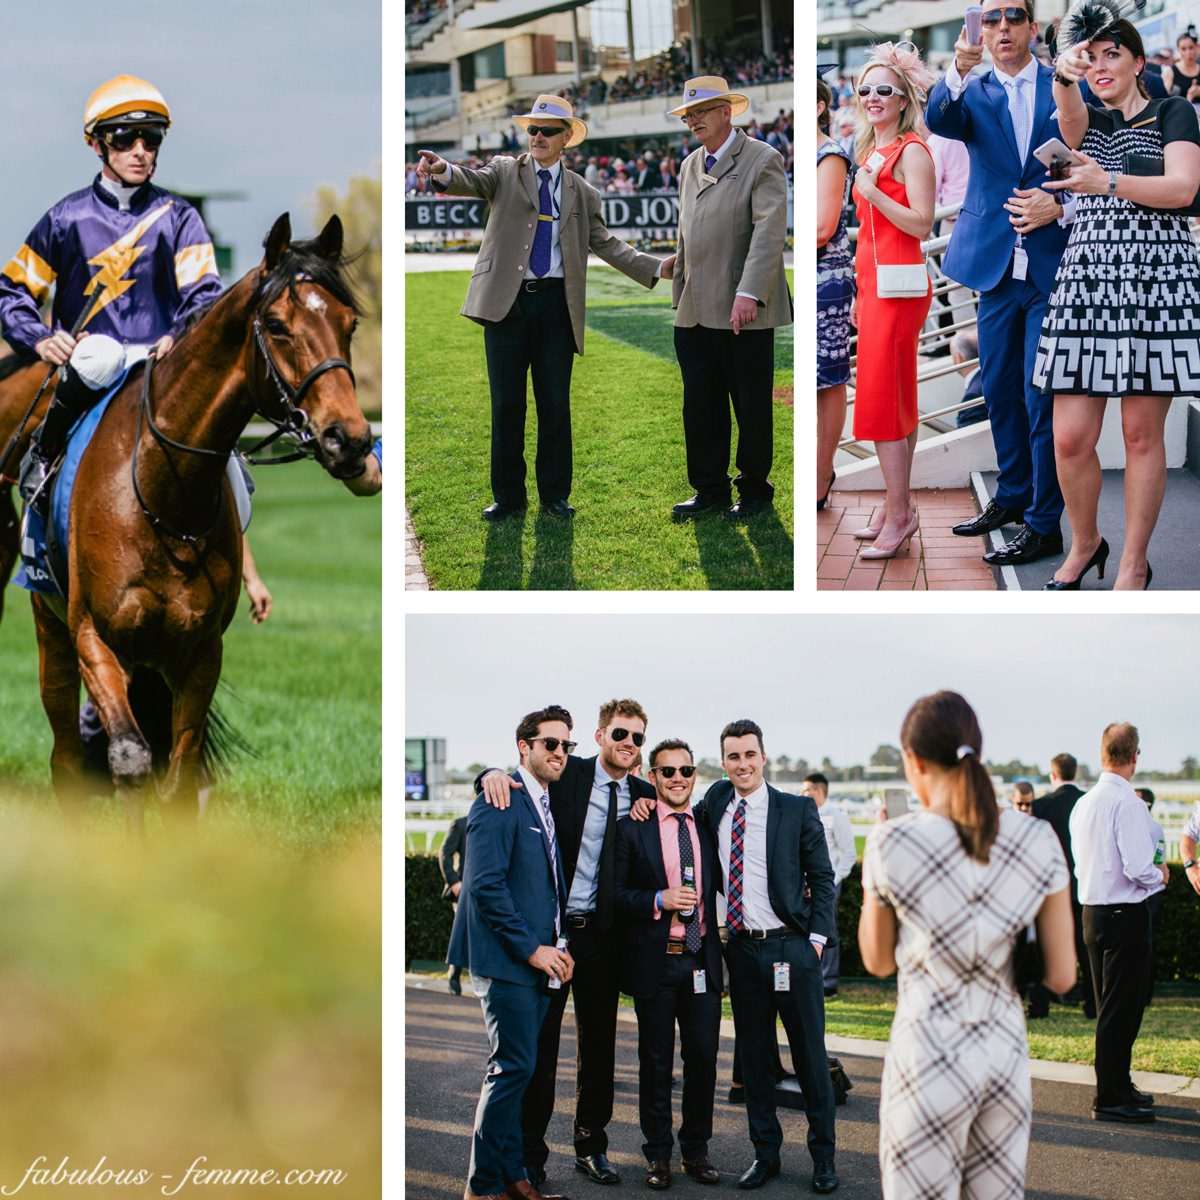 spring racing in style - tips for everyone